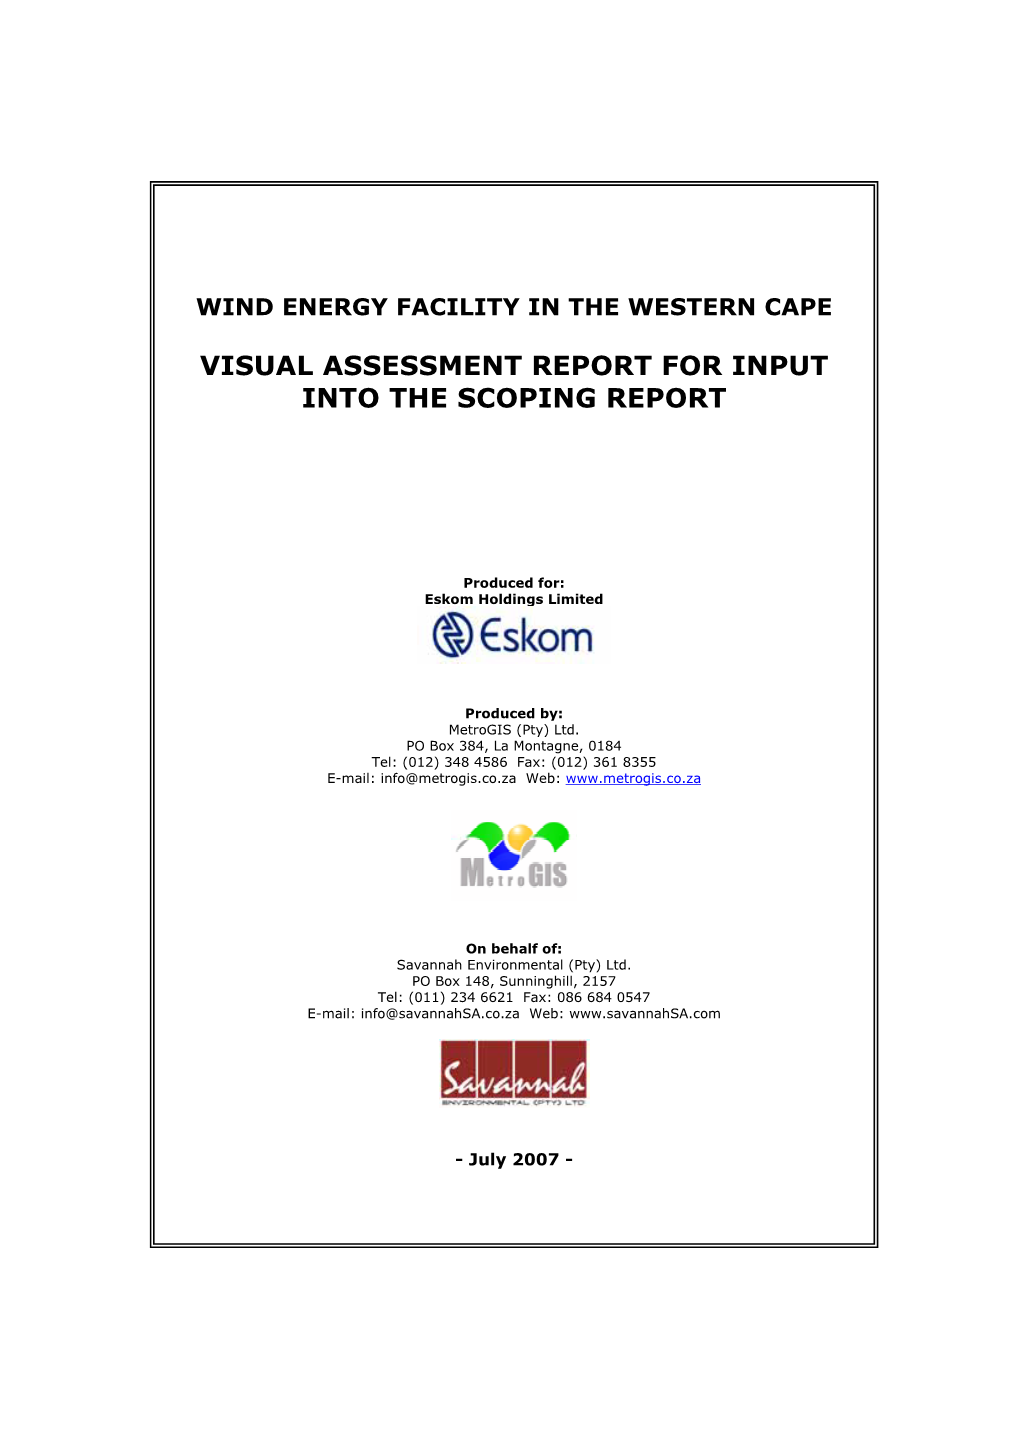 Visual Assessment Report for Input Into the Scoping Report